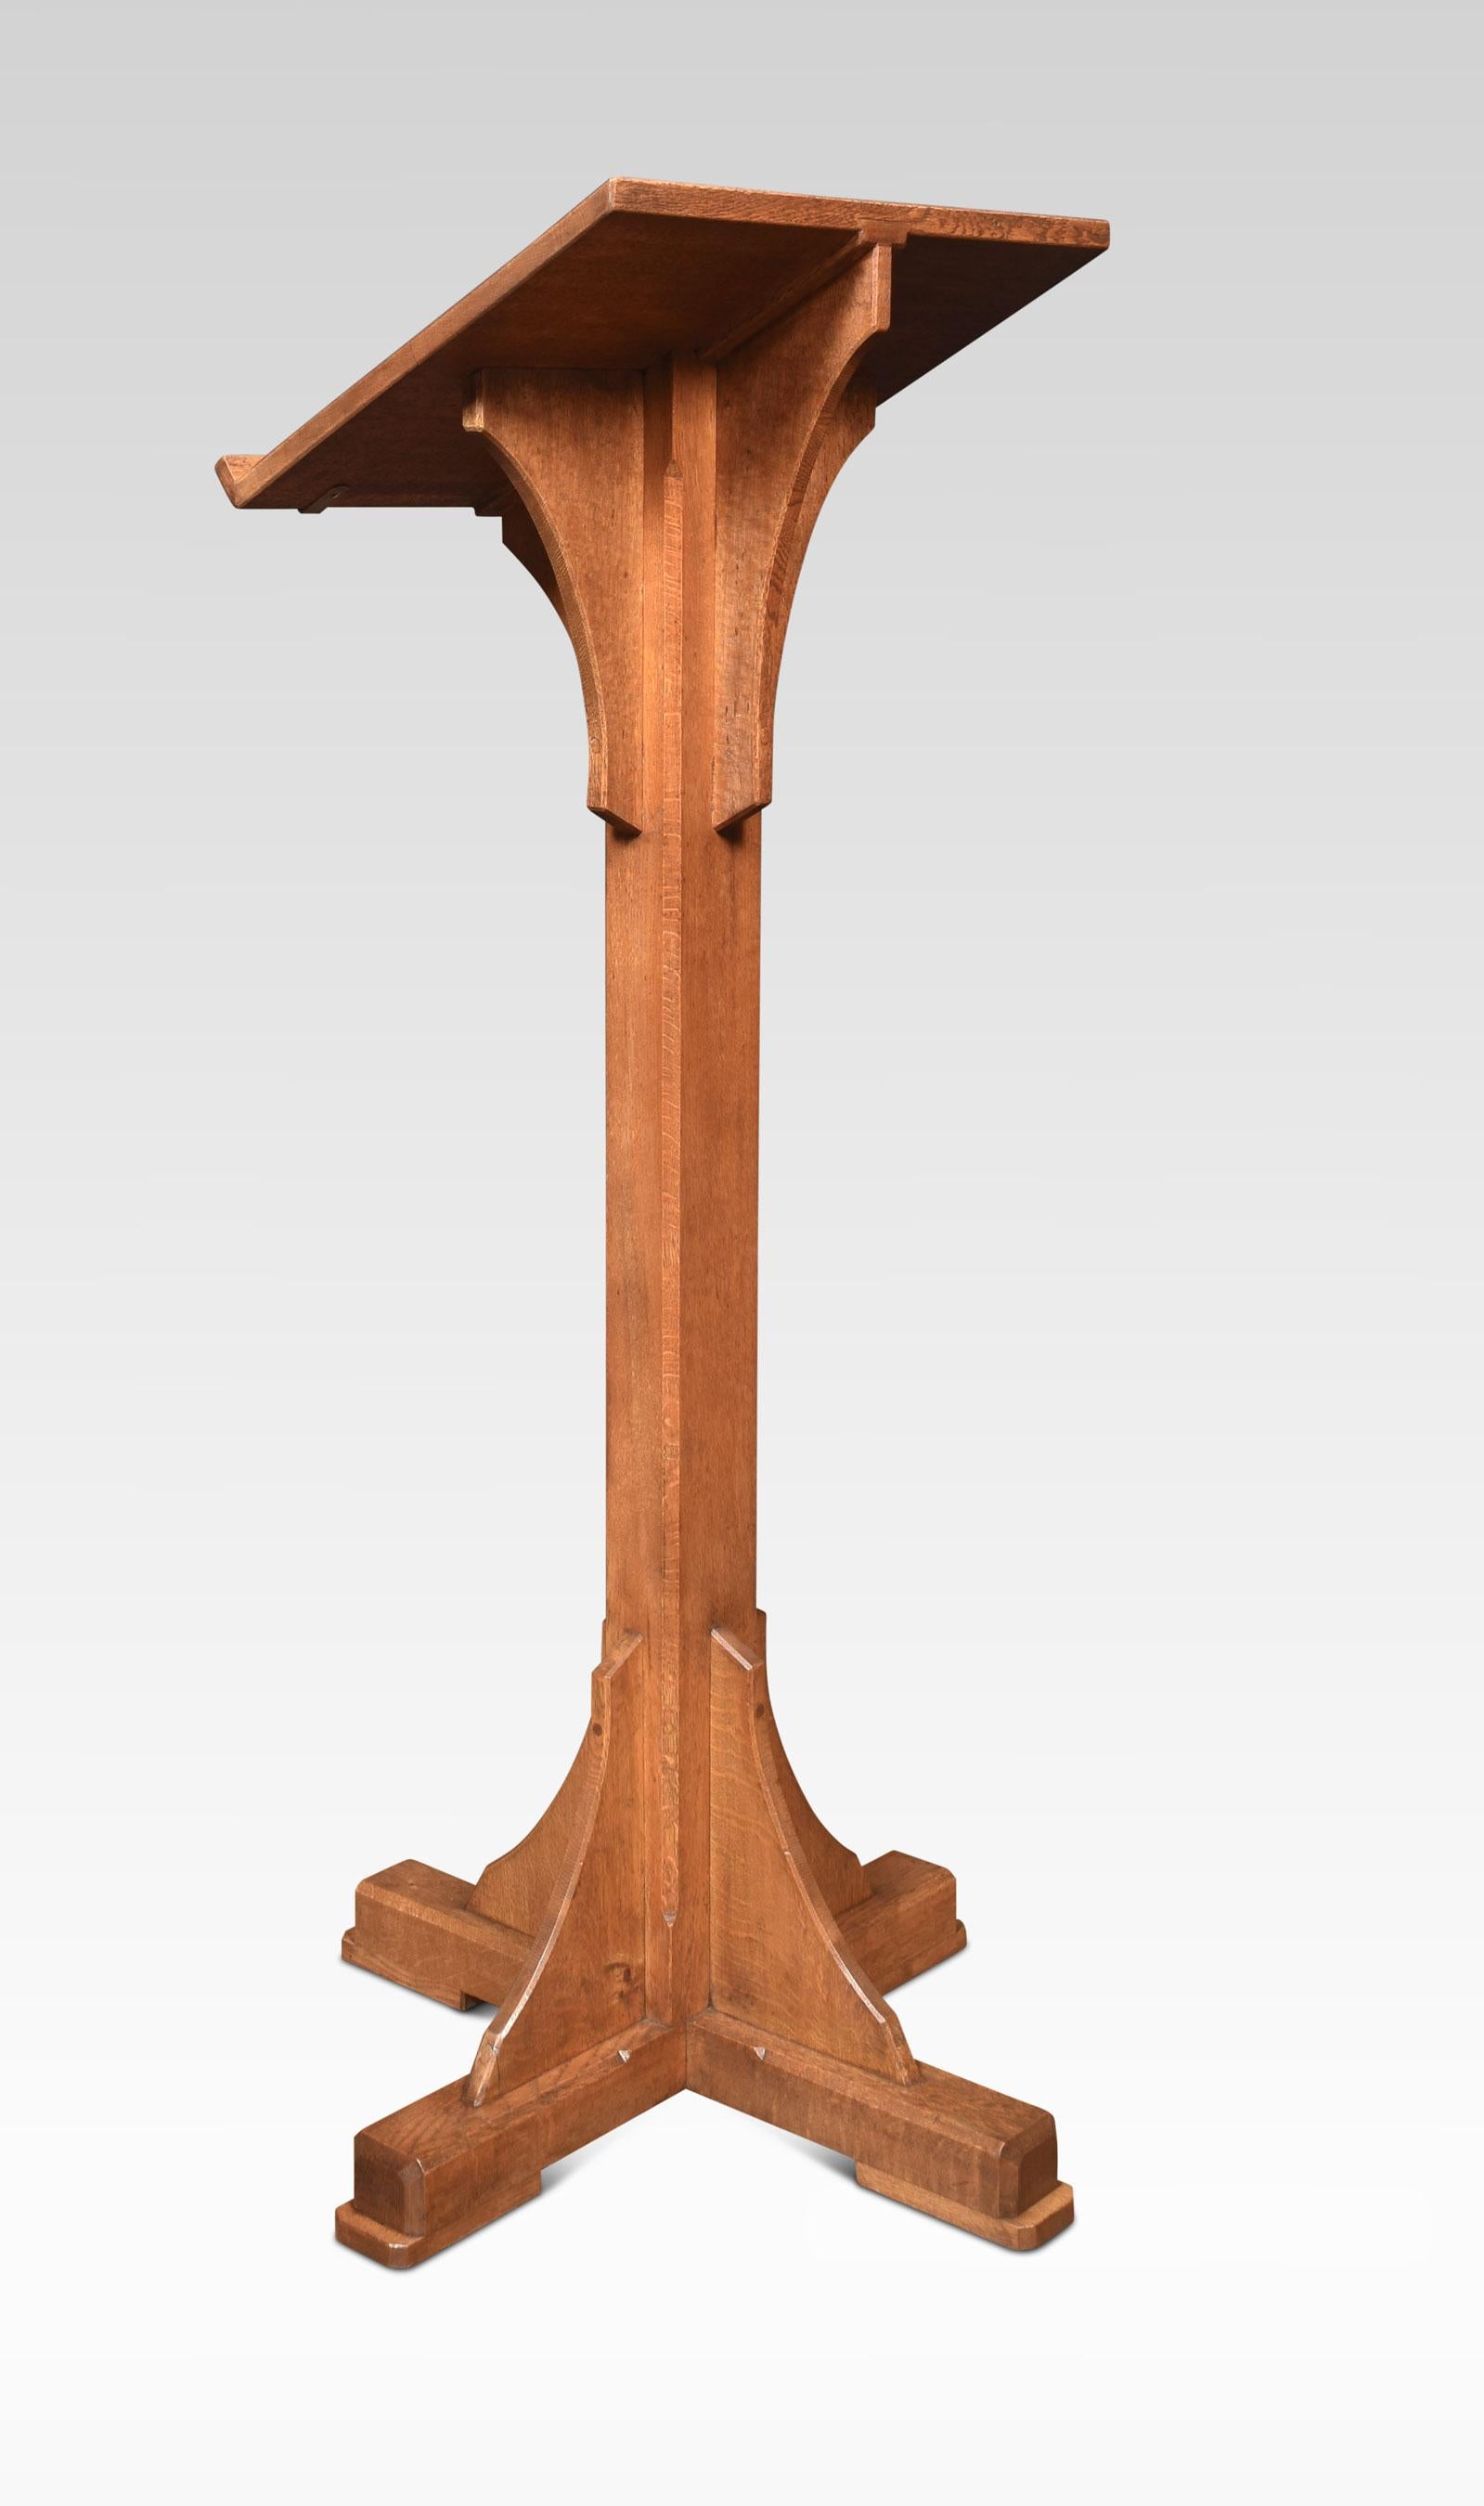 Oak lectern the bookrest, raised up on a square column and platform base.
Dimensions
Height 52.5 Inches
Width 25.5 Inches
Depth 25.5 Inches